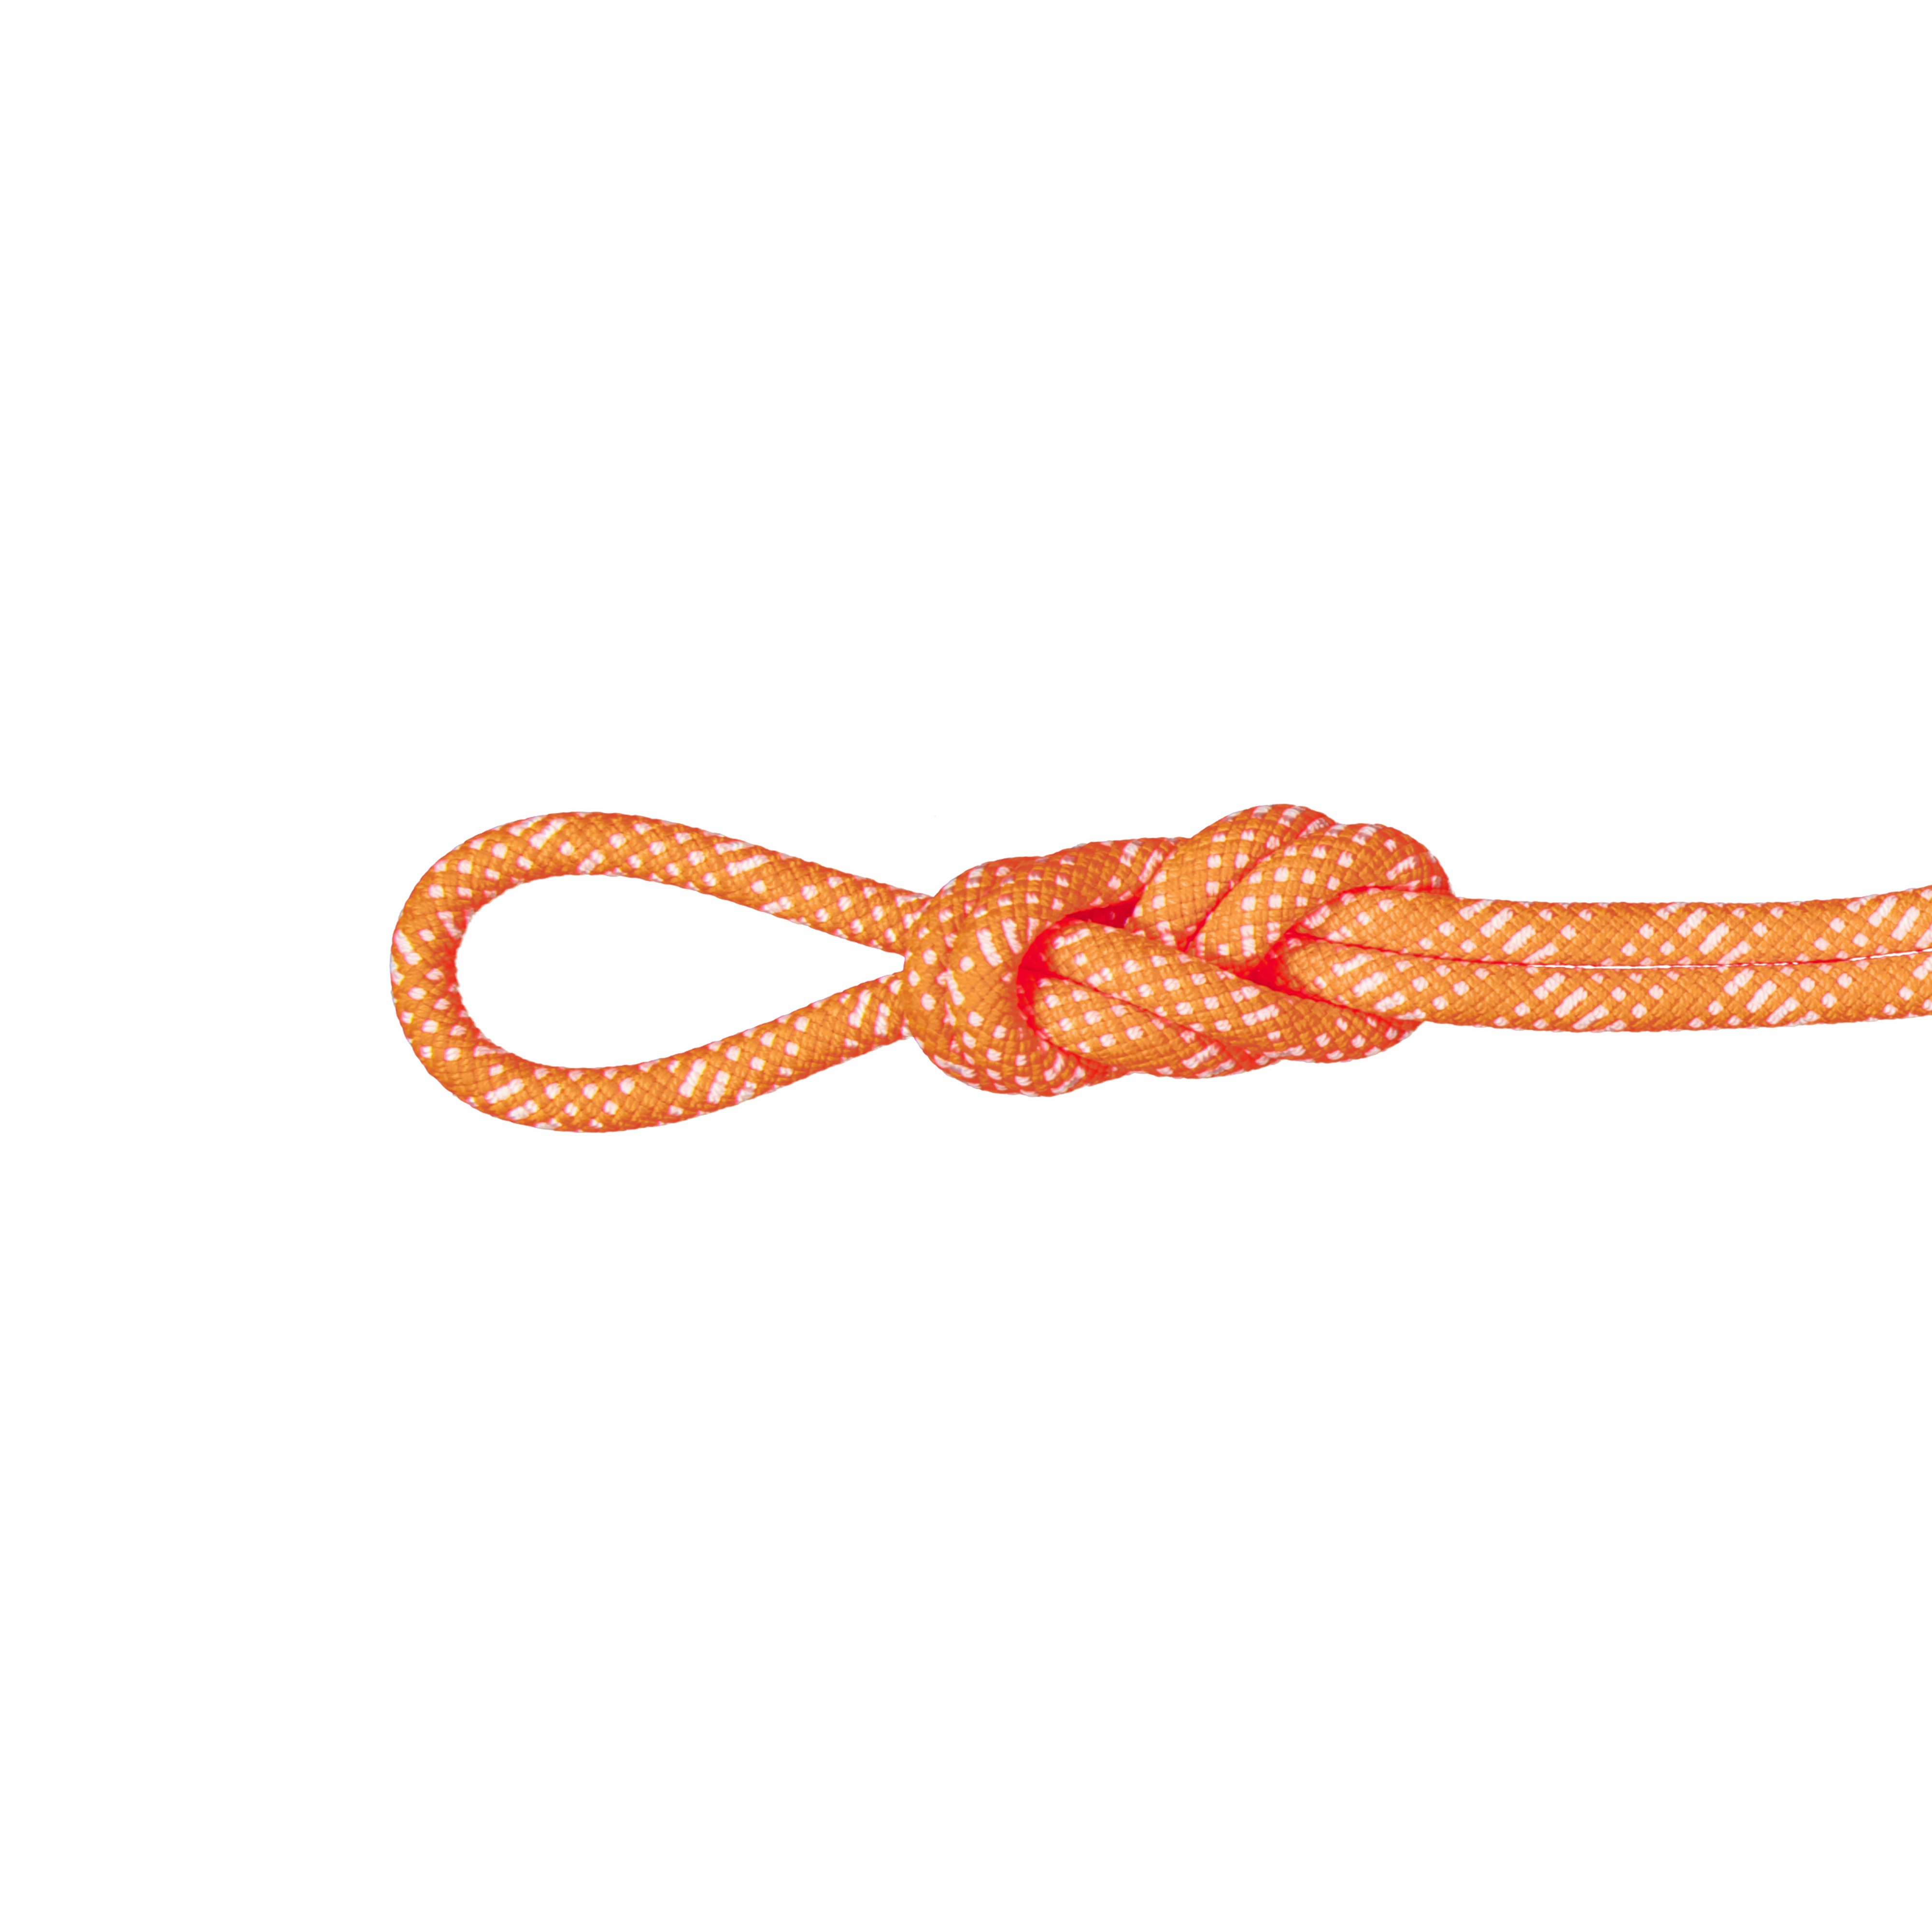 10.1 Gym Station Classic Rope - Classic Standard, safety orange-white, 150 m product image